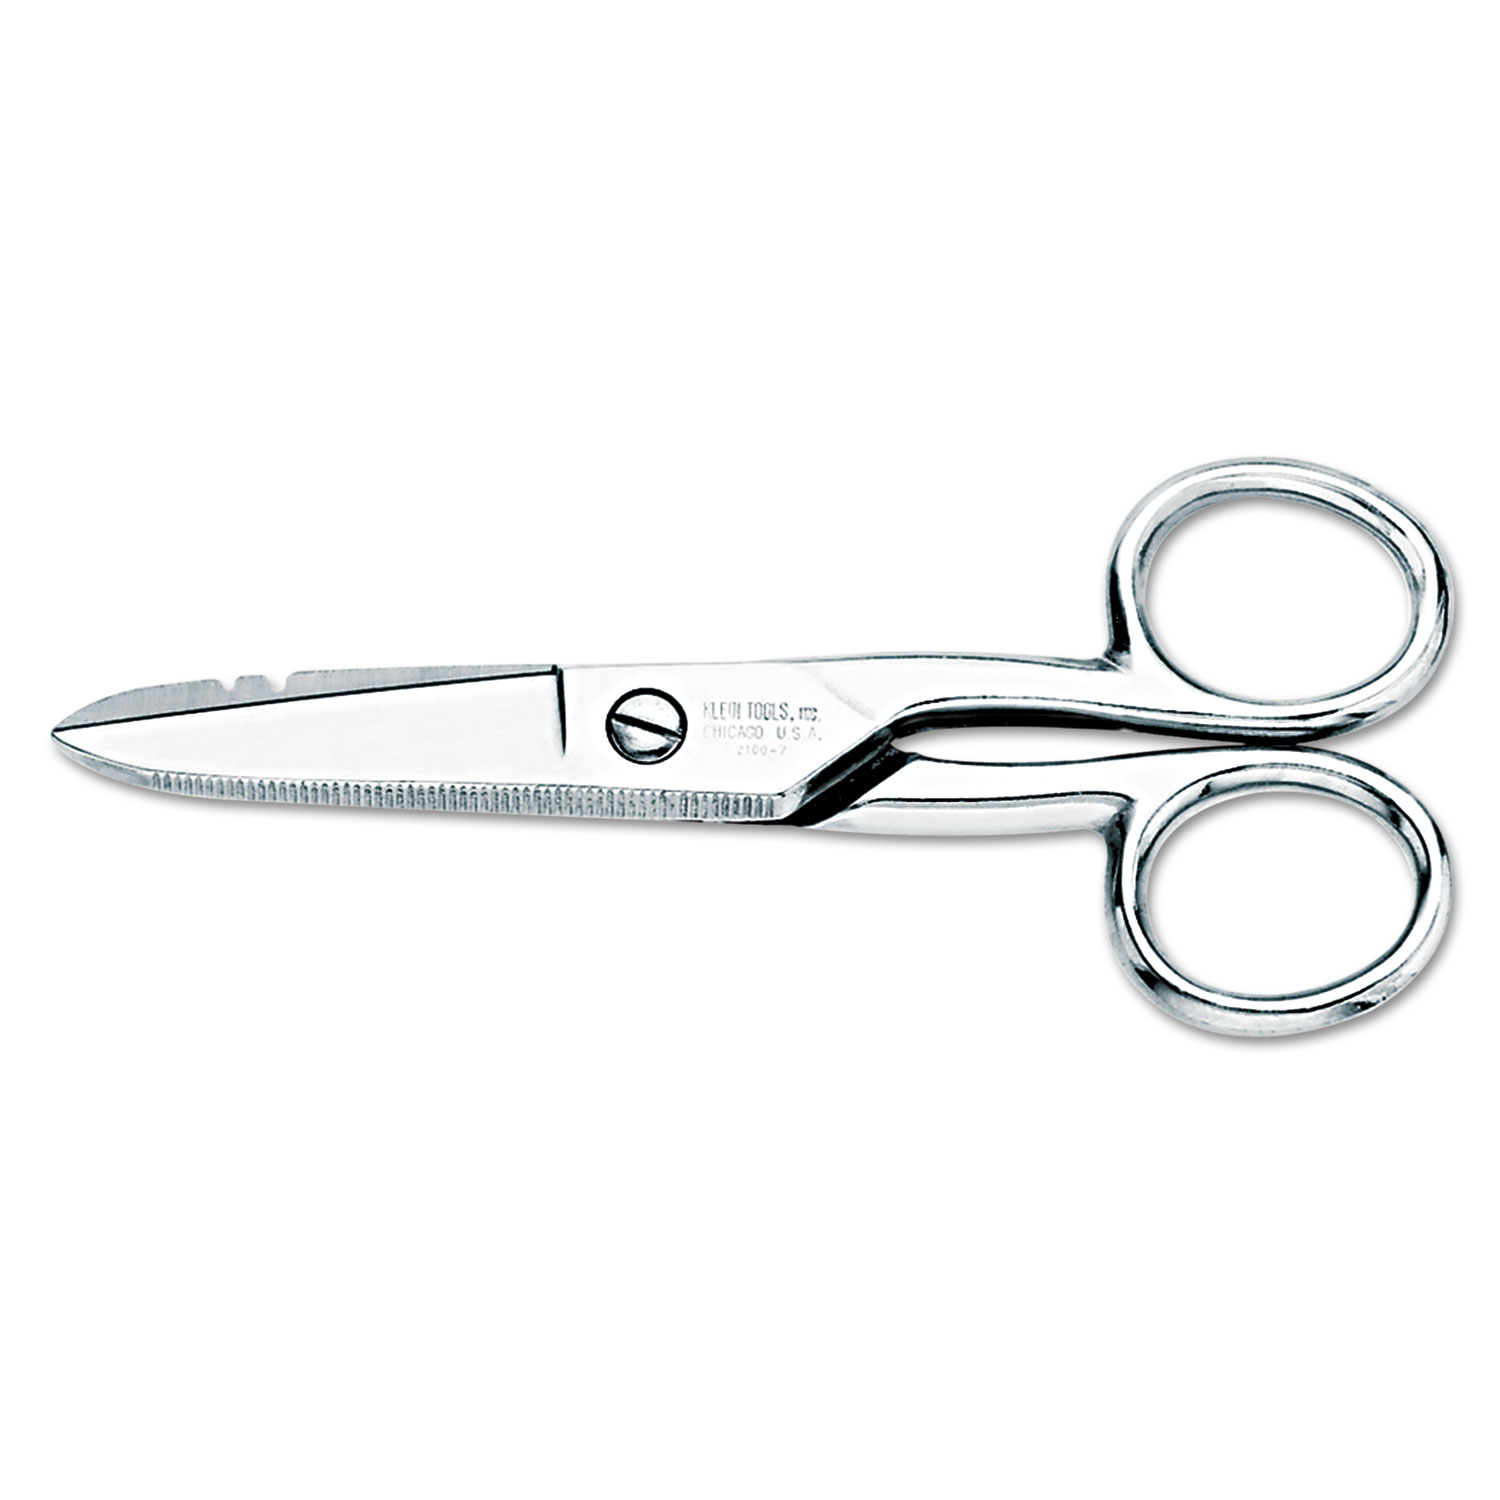 Electricians Scissors With Stripping Notches, 5 1/4in